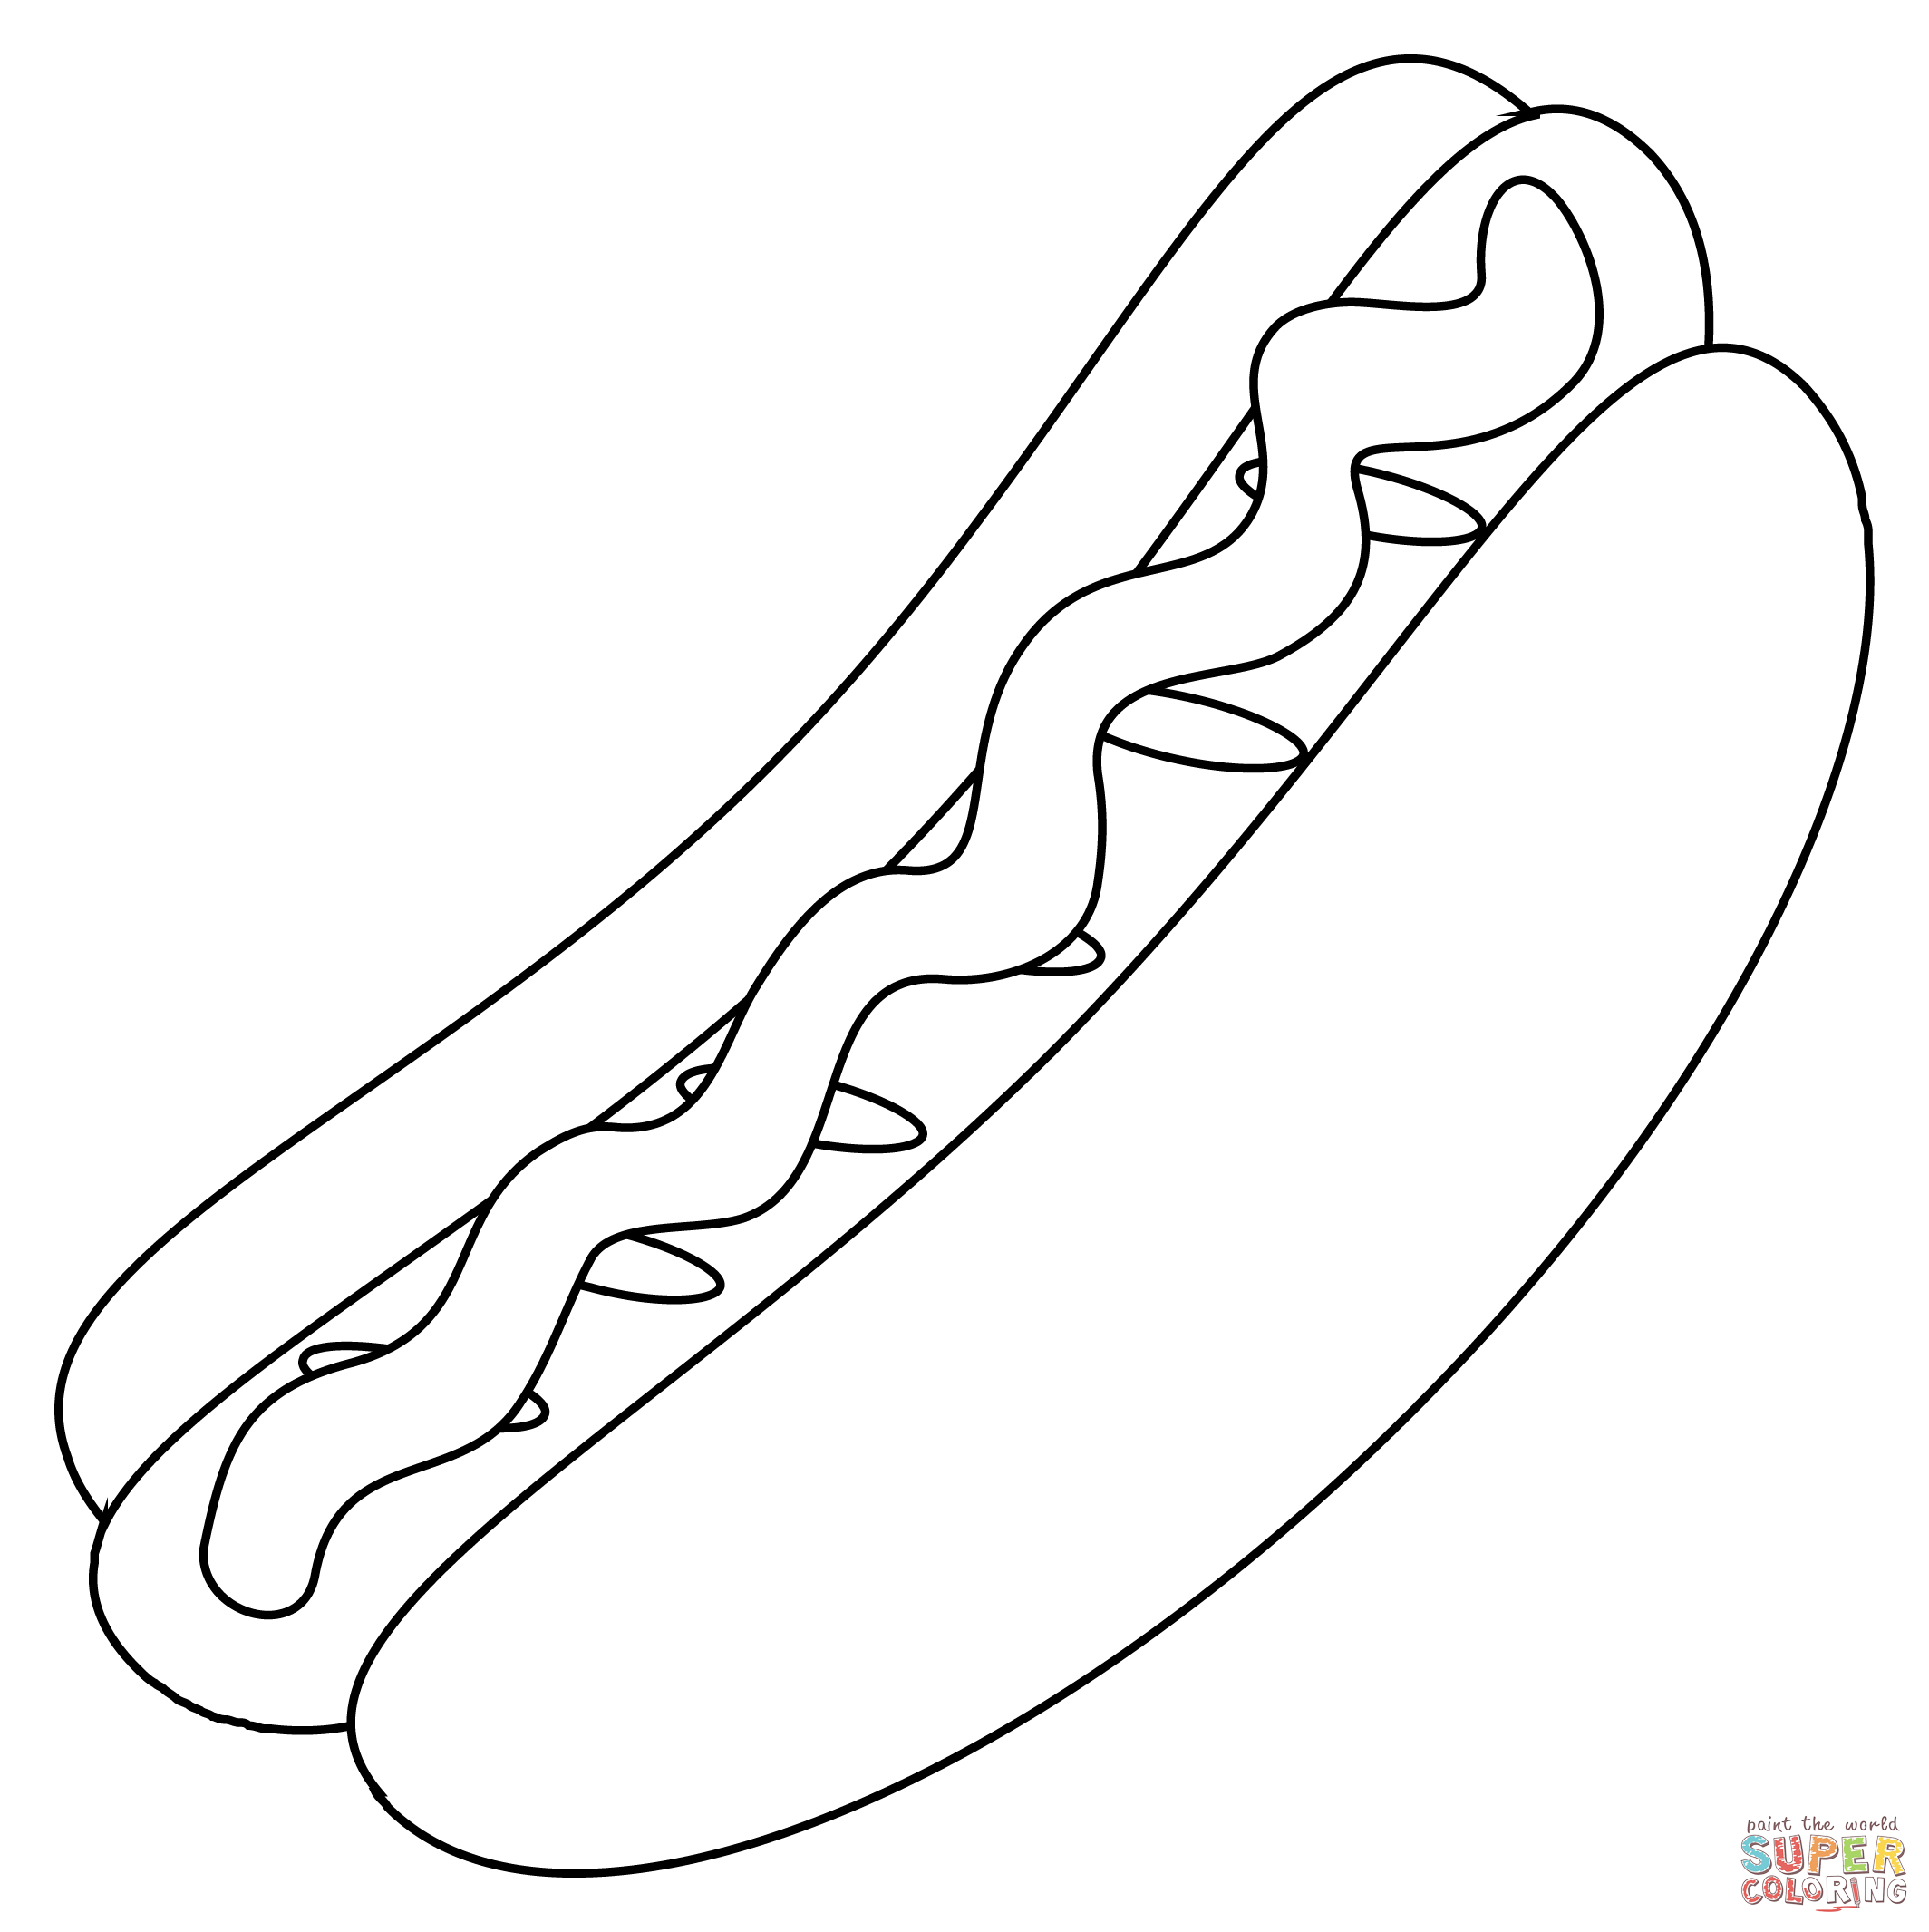 Hot dog coloring page free printable coloring pages